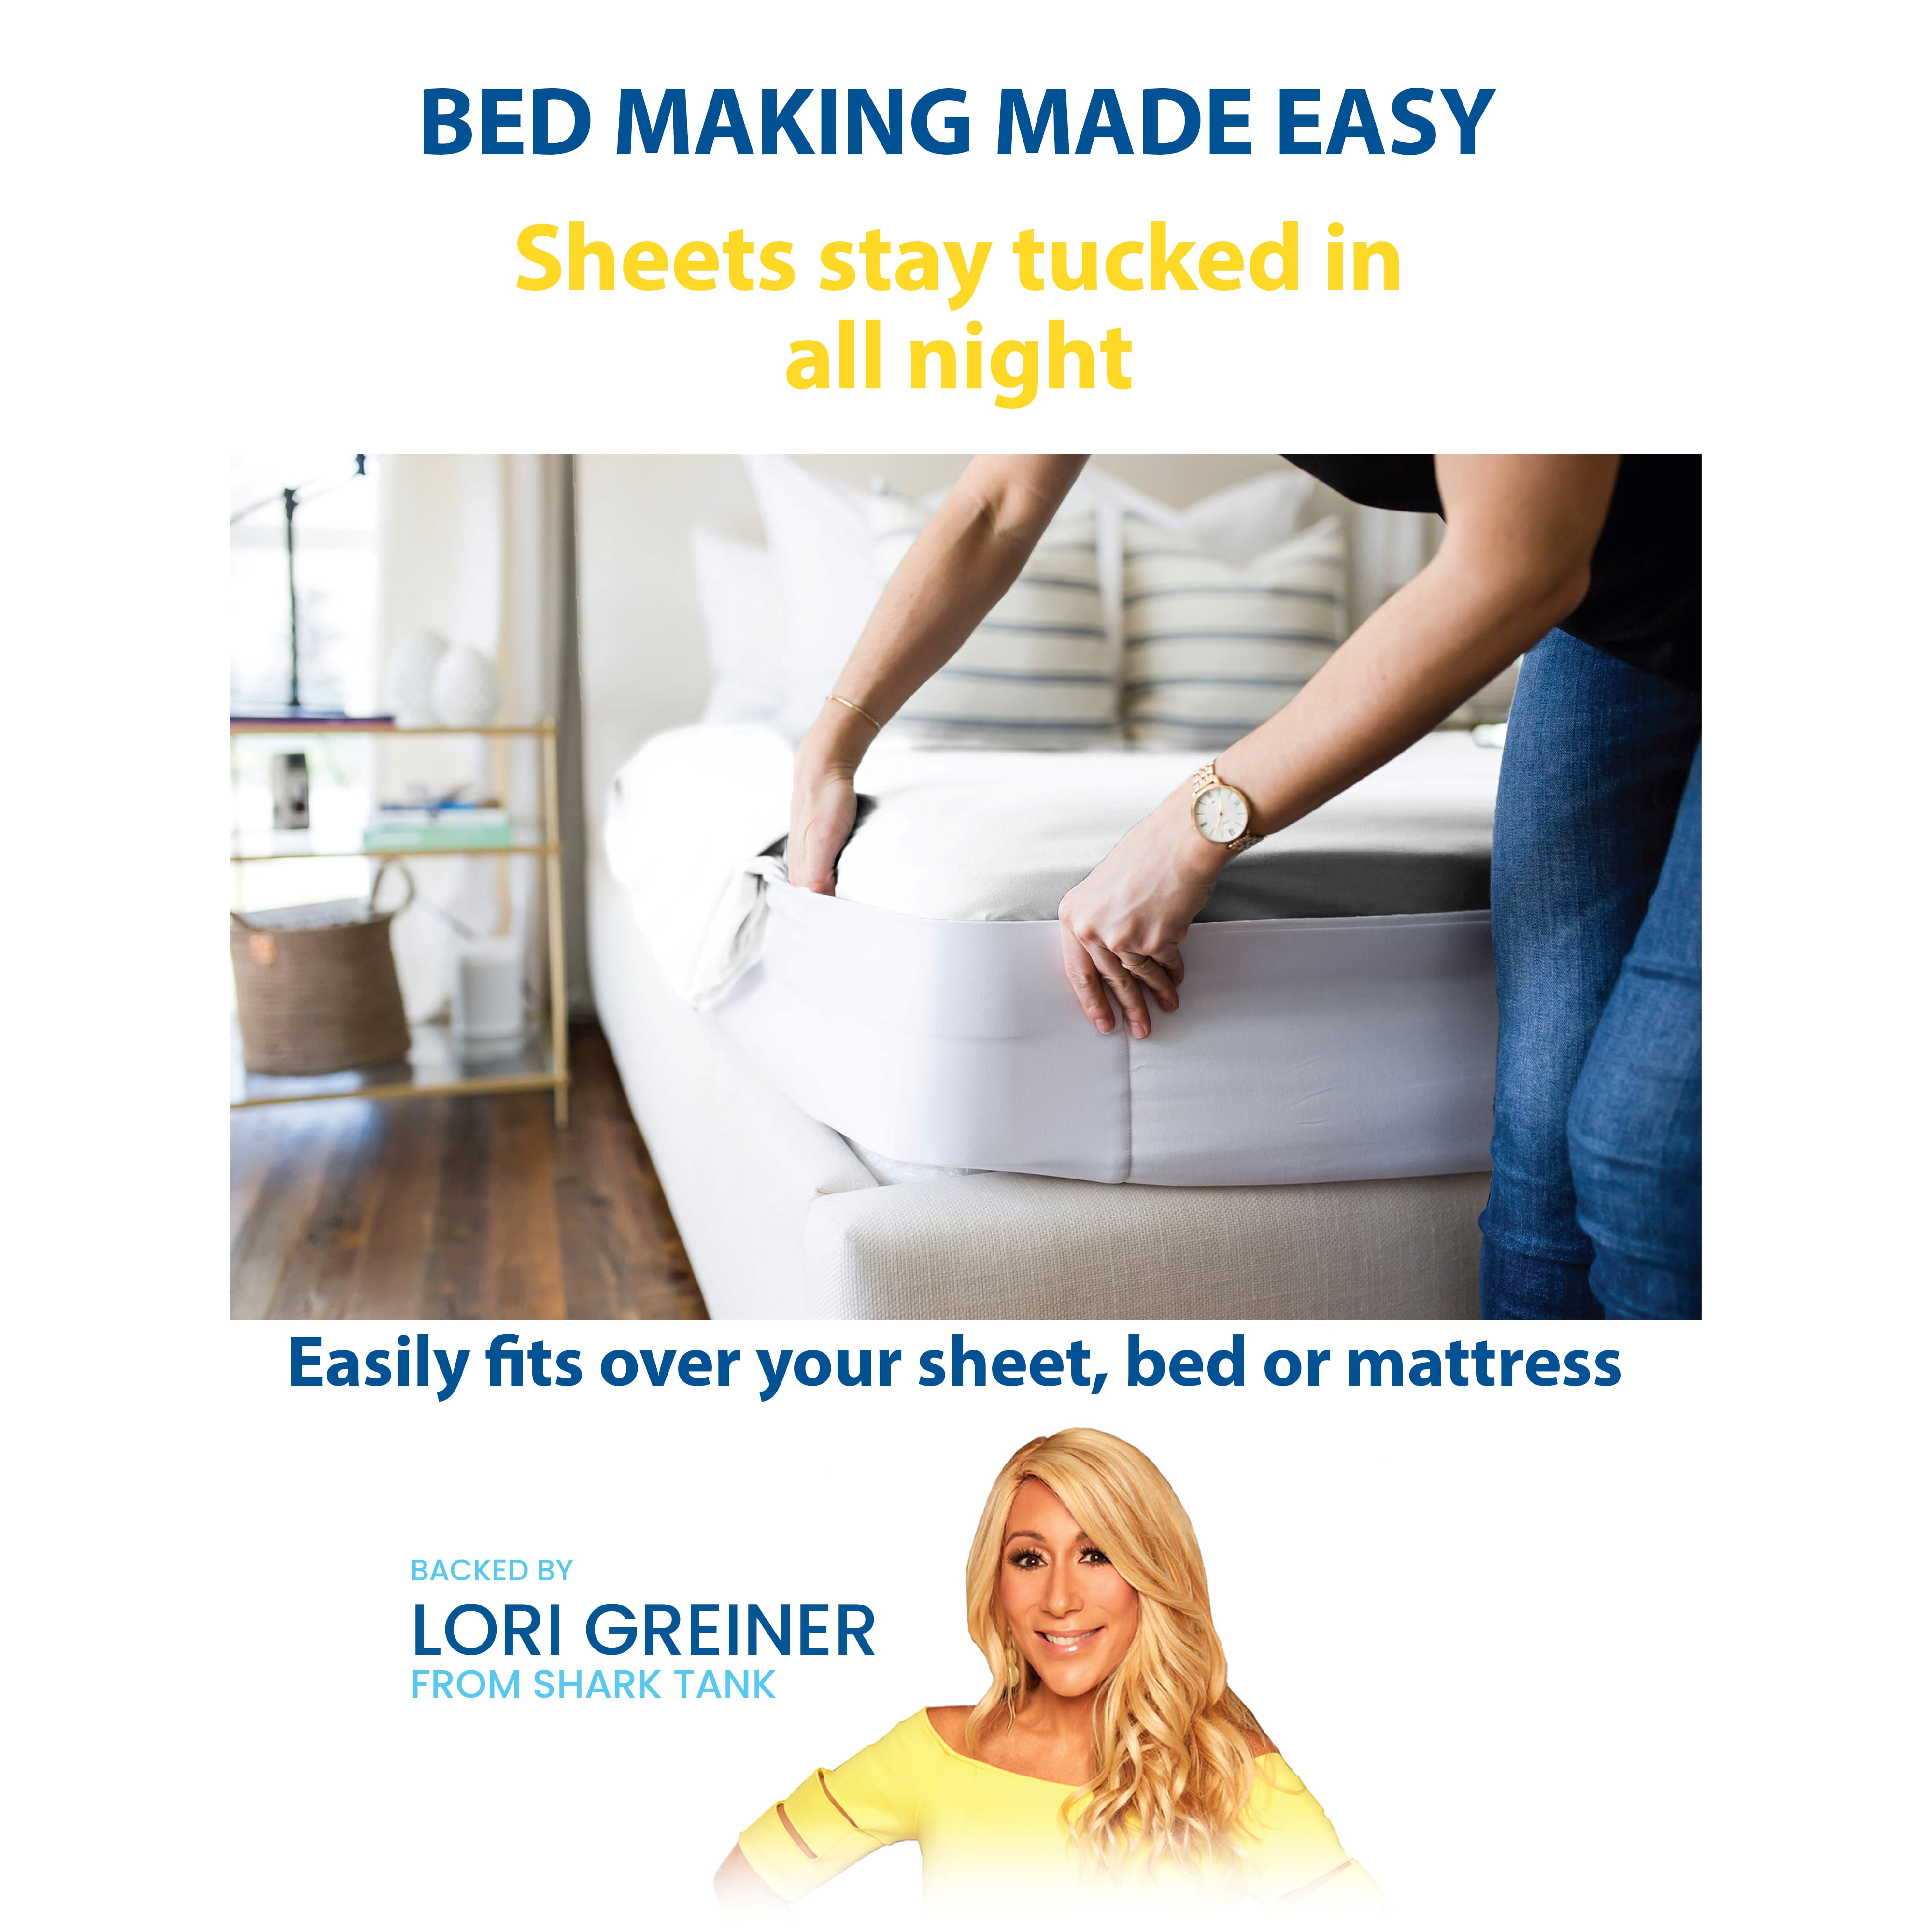 NEW Lori Greiner Better Bedder Easy Bed Making Shark Tank Product - Queen  Size